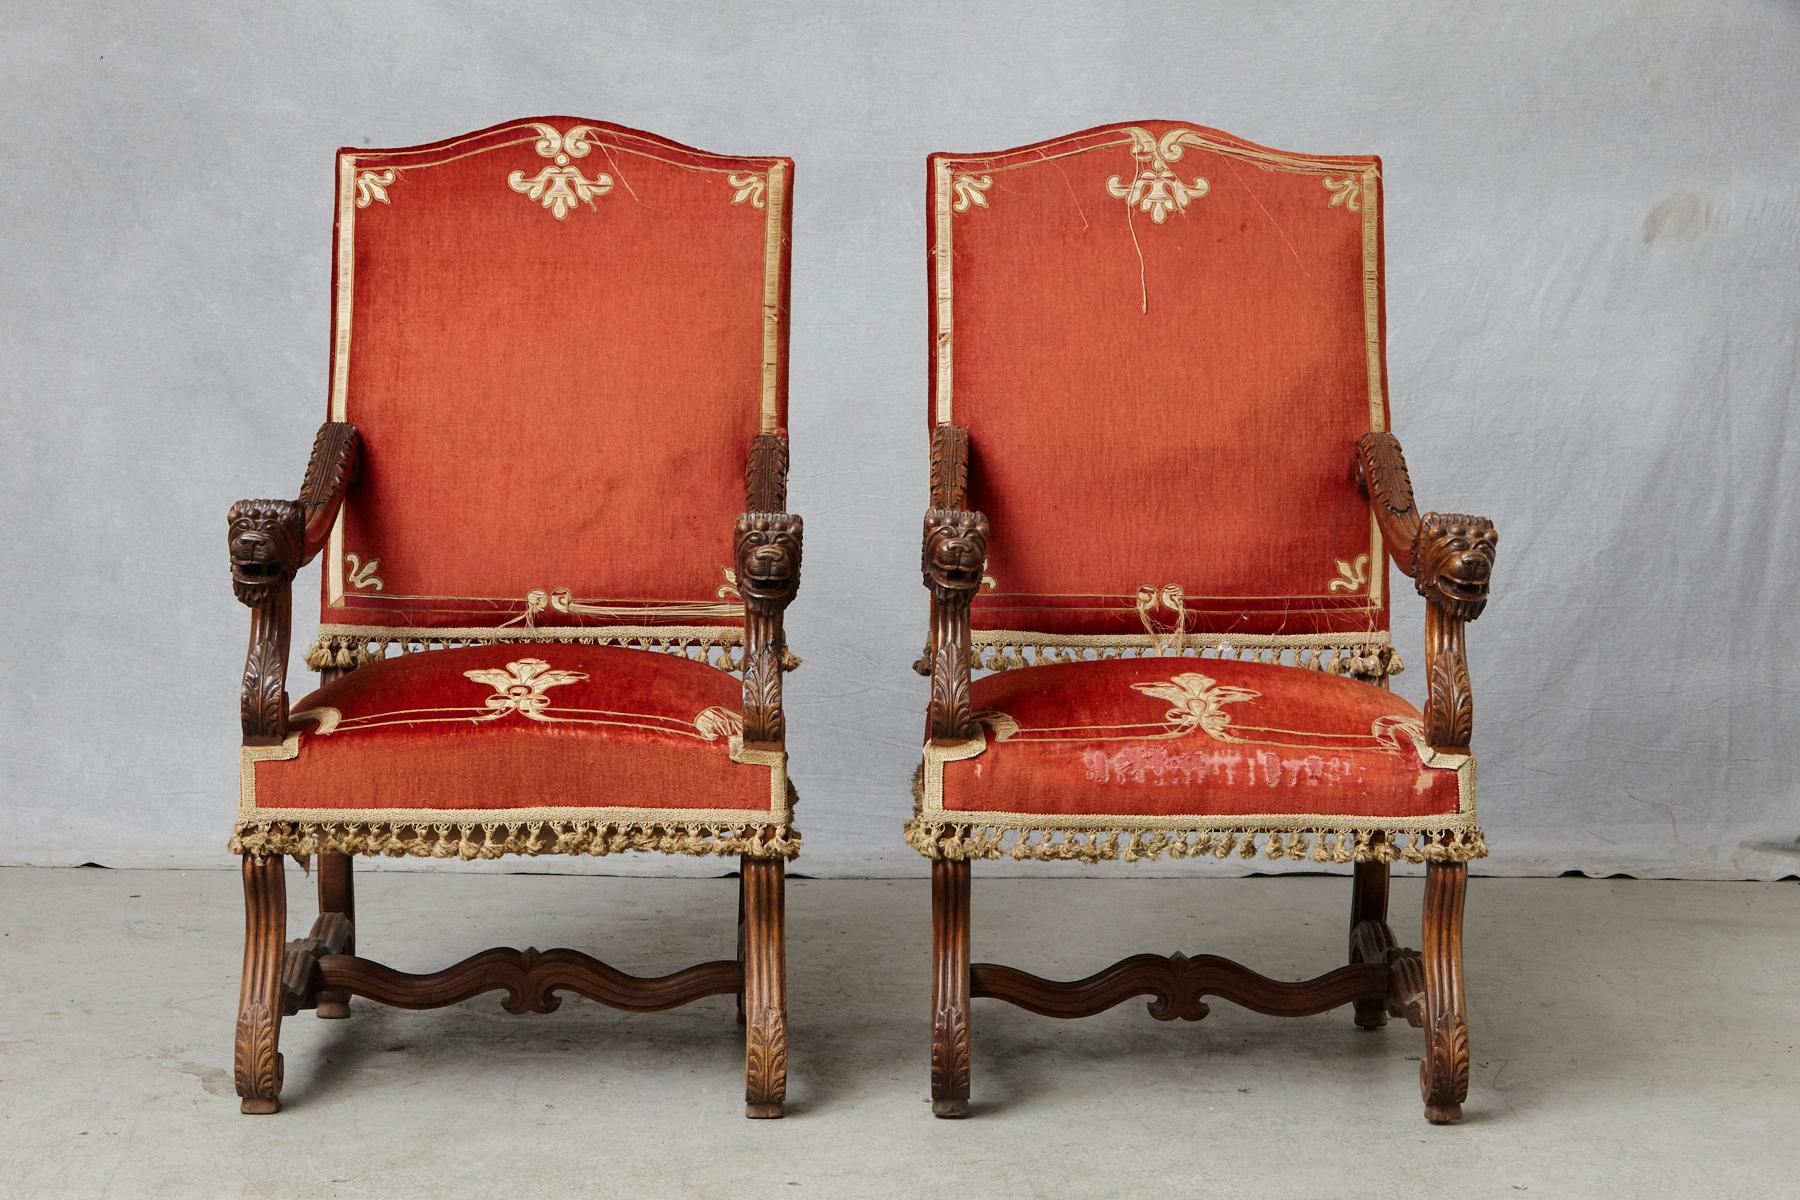 Majestic pair of antique French Louis XIII, Os de Mouton, walnut throne chairs with elaborated carvings, including figural lions head arm rests, carved acanthus-leaves on scrolled arms and feet and legs joined by H-shaped stretchers. The chairs have